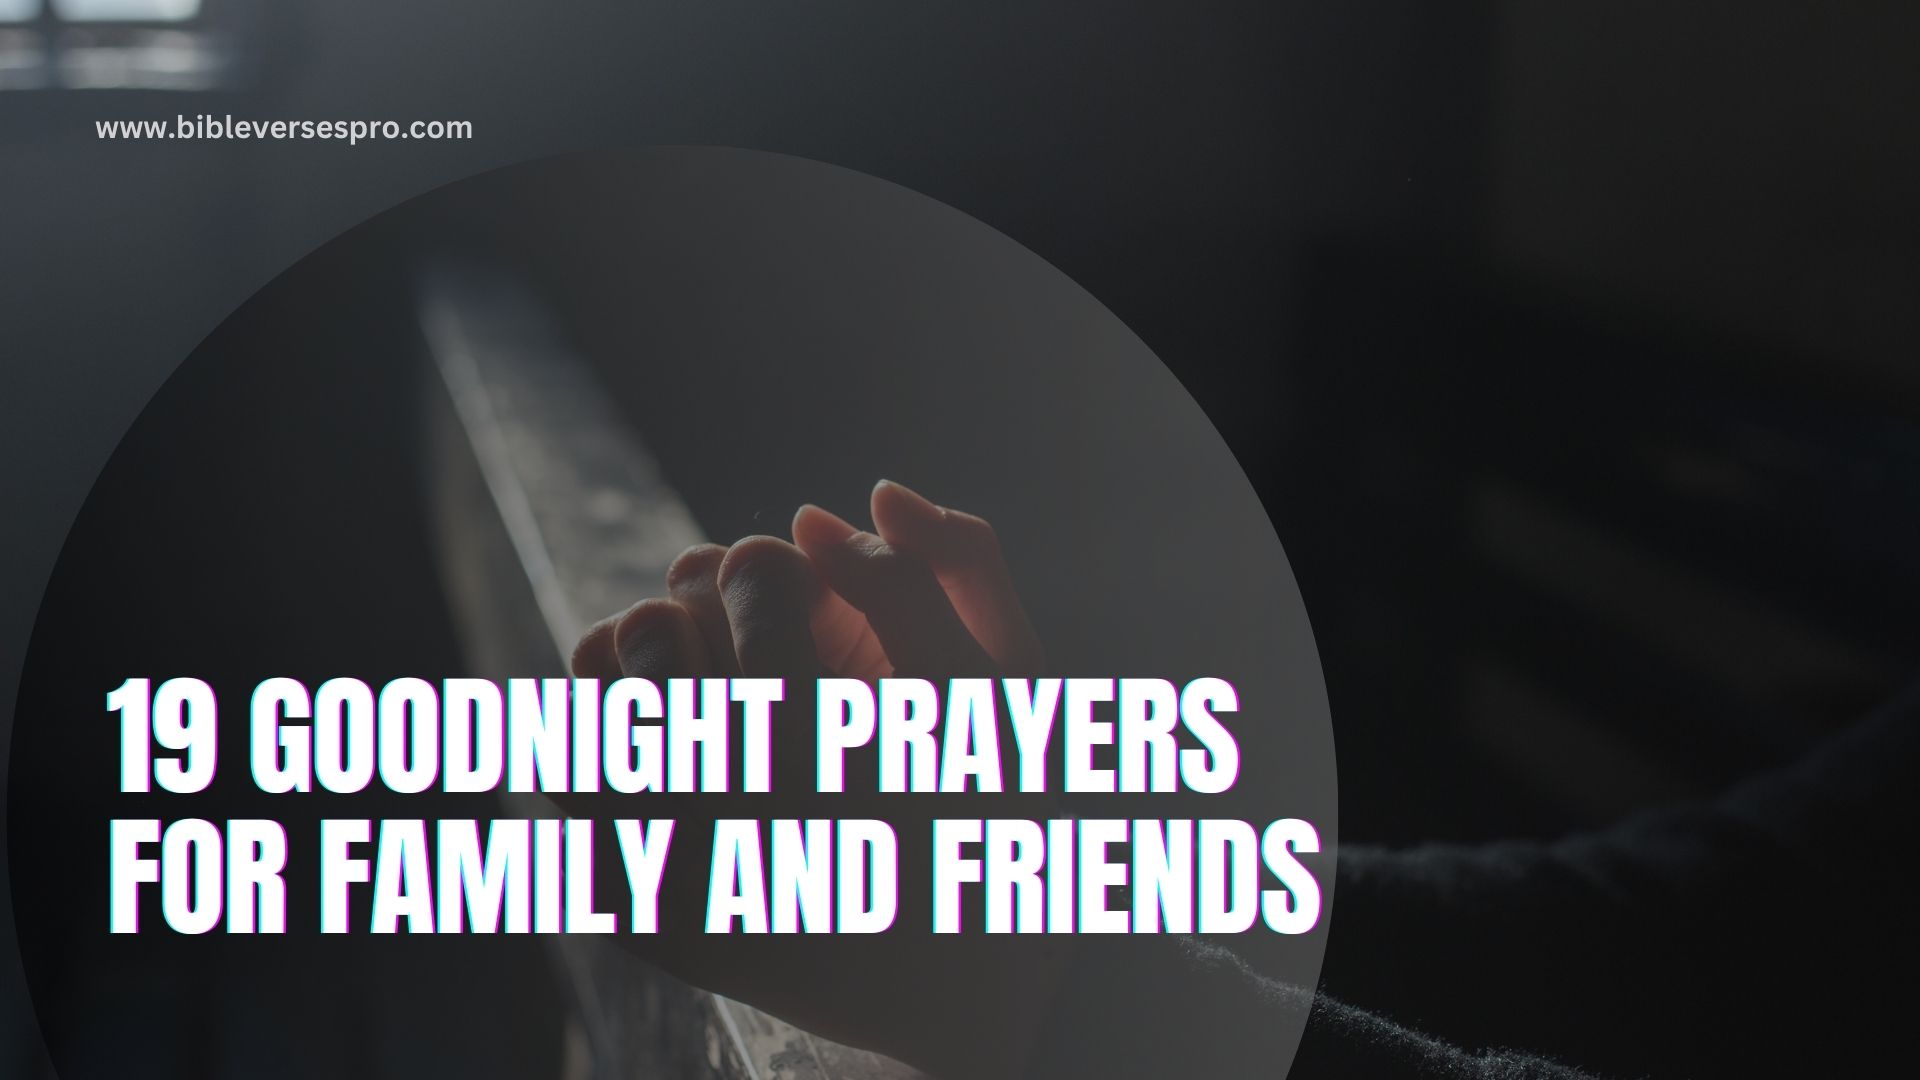 19 Goodnight Prayers for Family and Friends